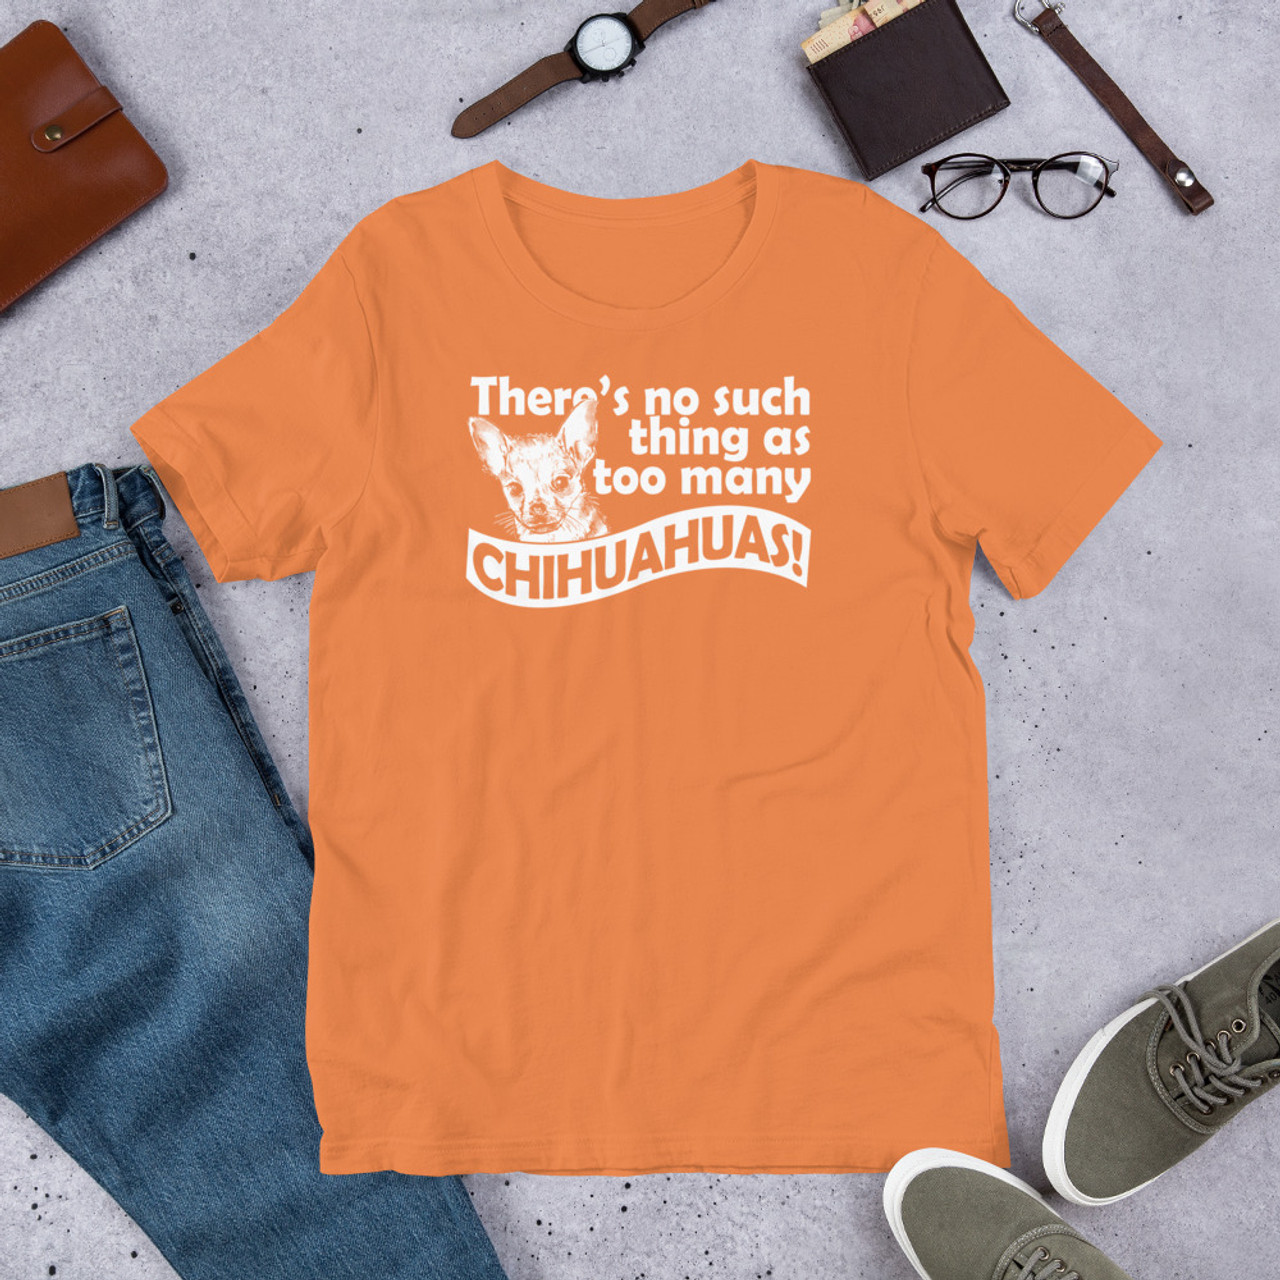 Burnt Orange T-Shirt - Bella + Canvas 3001 There's No Such Thing As Too Many Chihuahuas